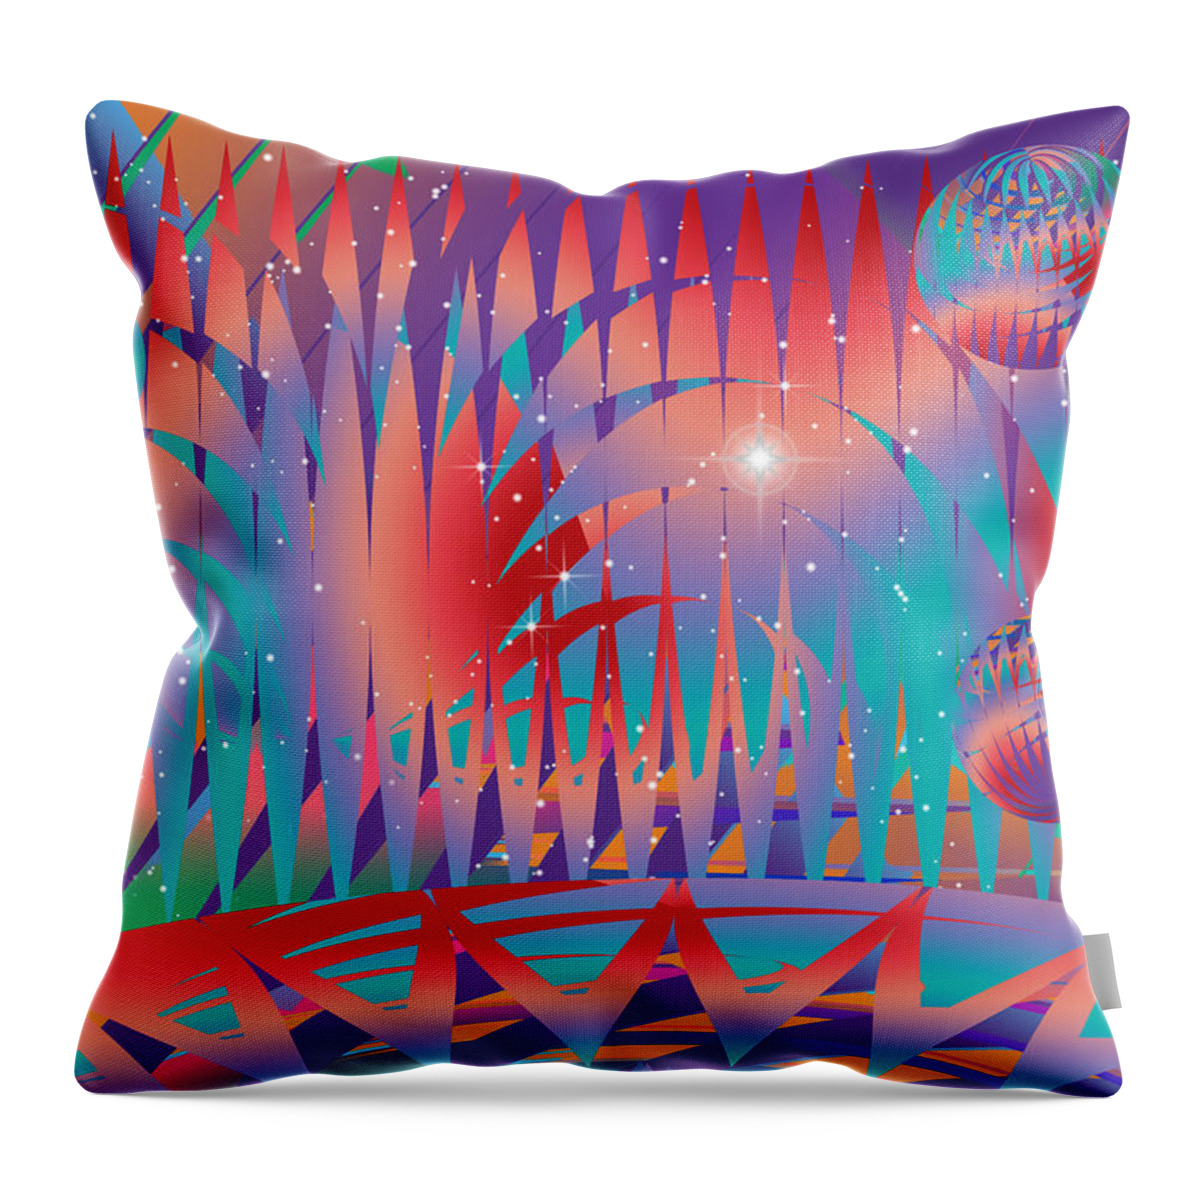 Phil Sadler Throw Pillow featuring the digital art Pineapple In Paradise by Phil Sadler